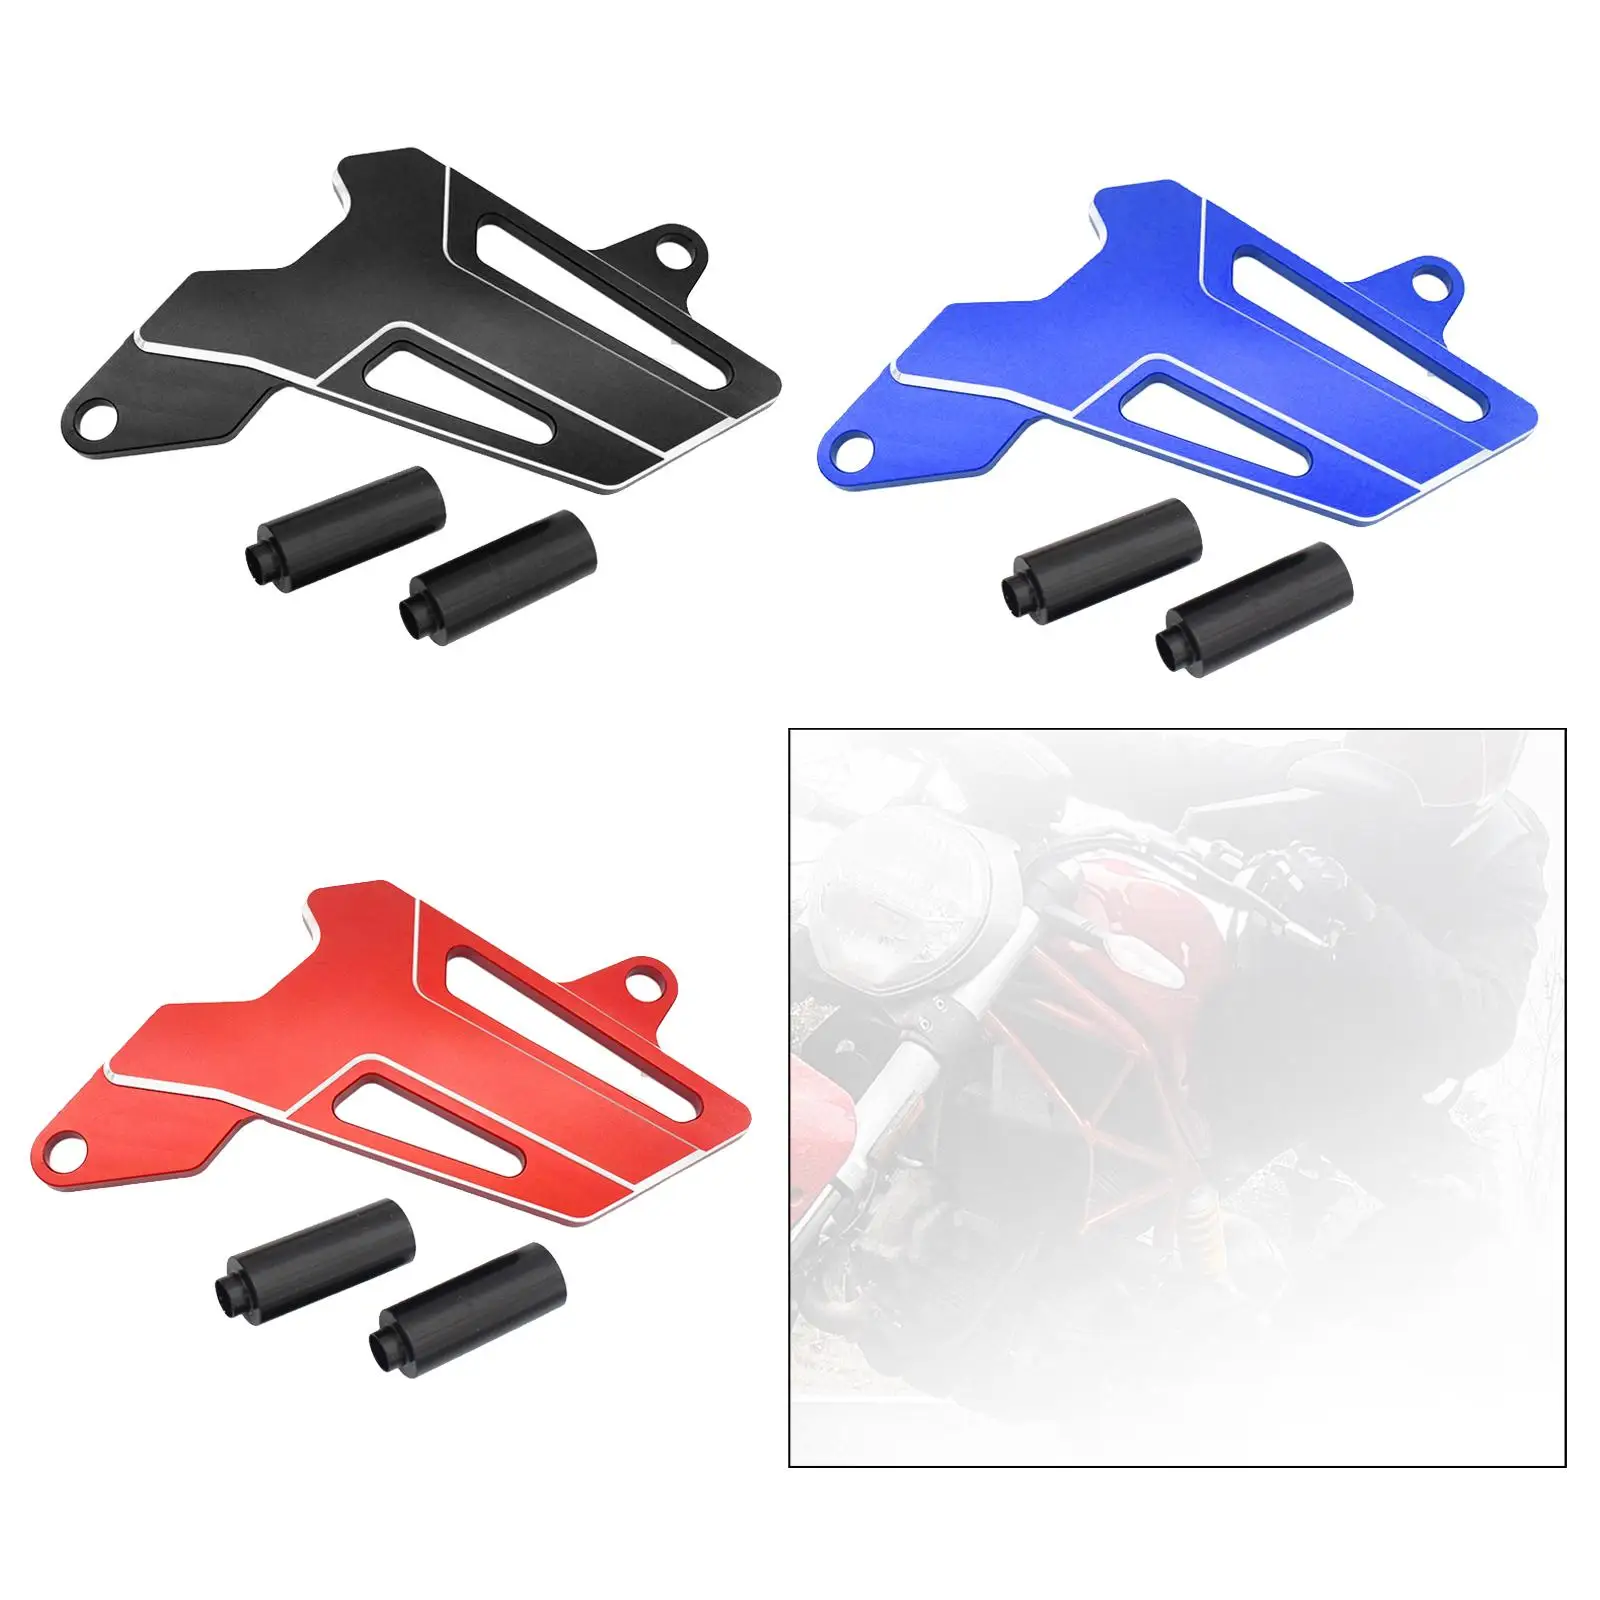 Front Sprocket Guard Chain Protector for Honda Crf250 Rally 2017-2019